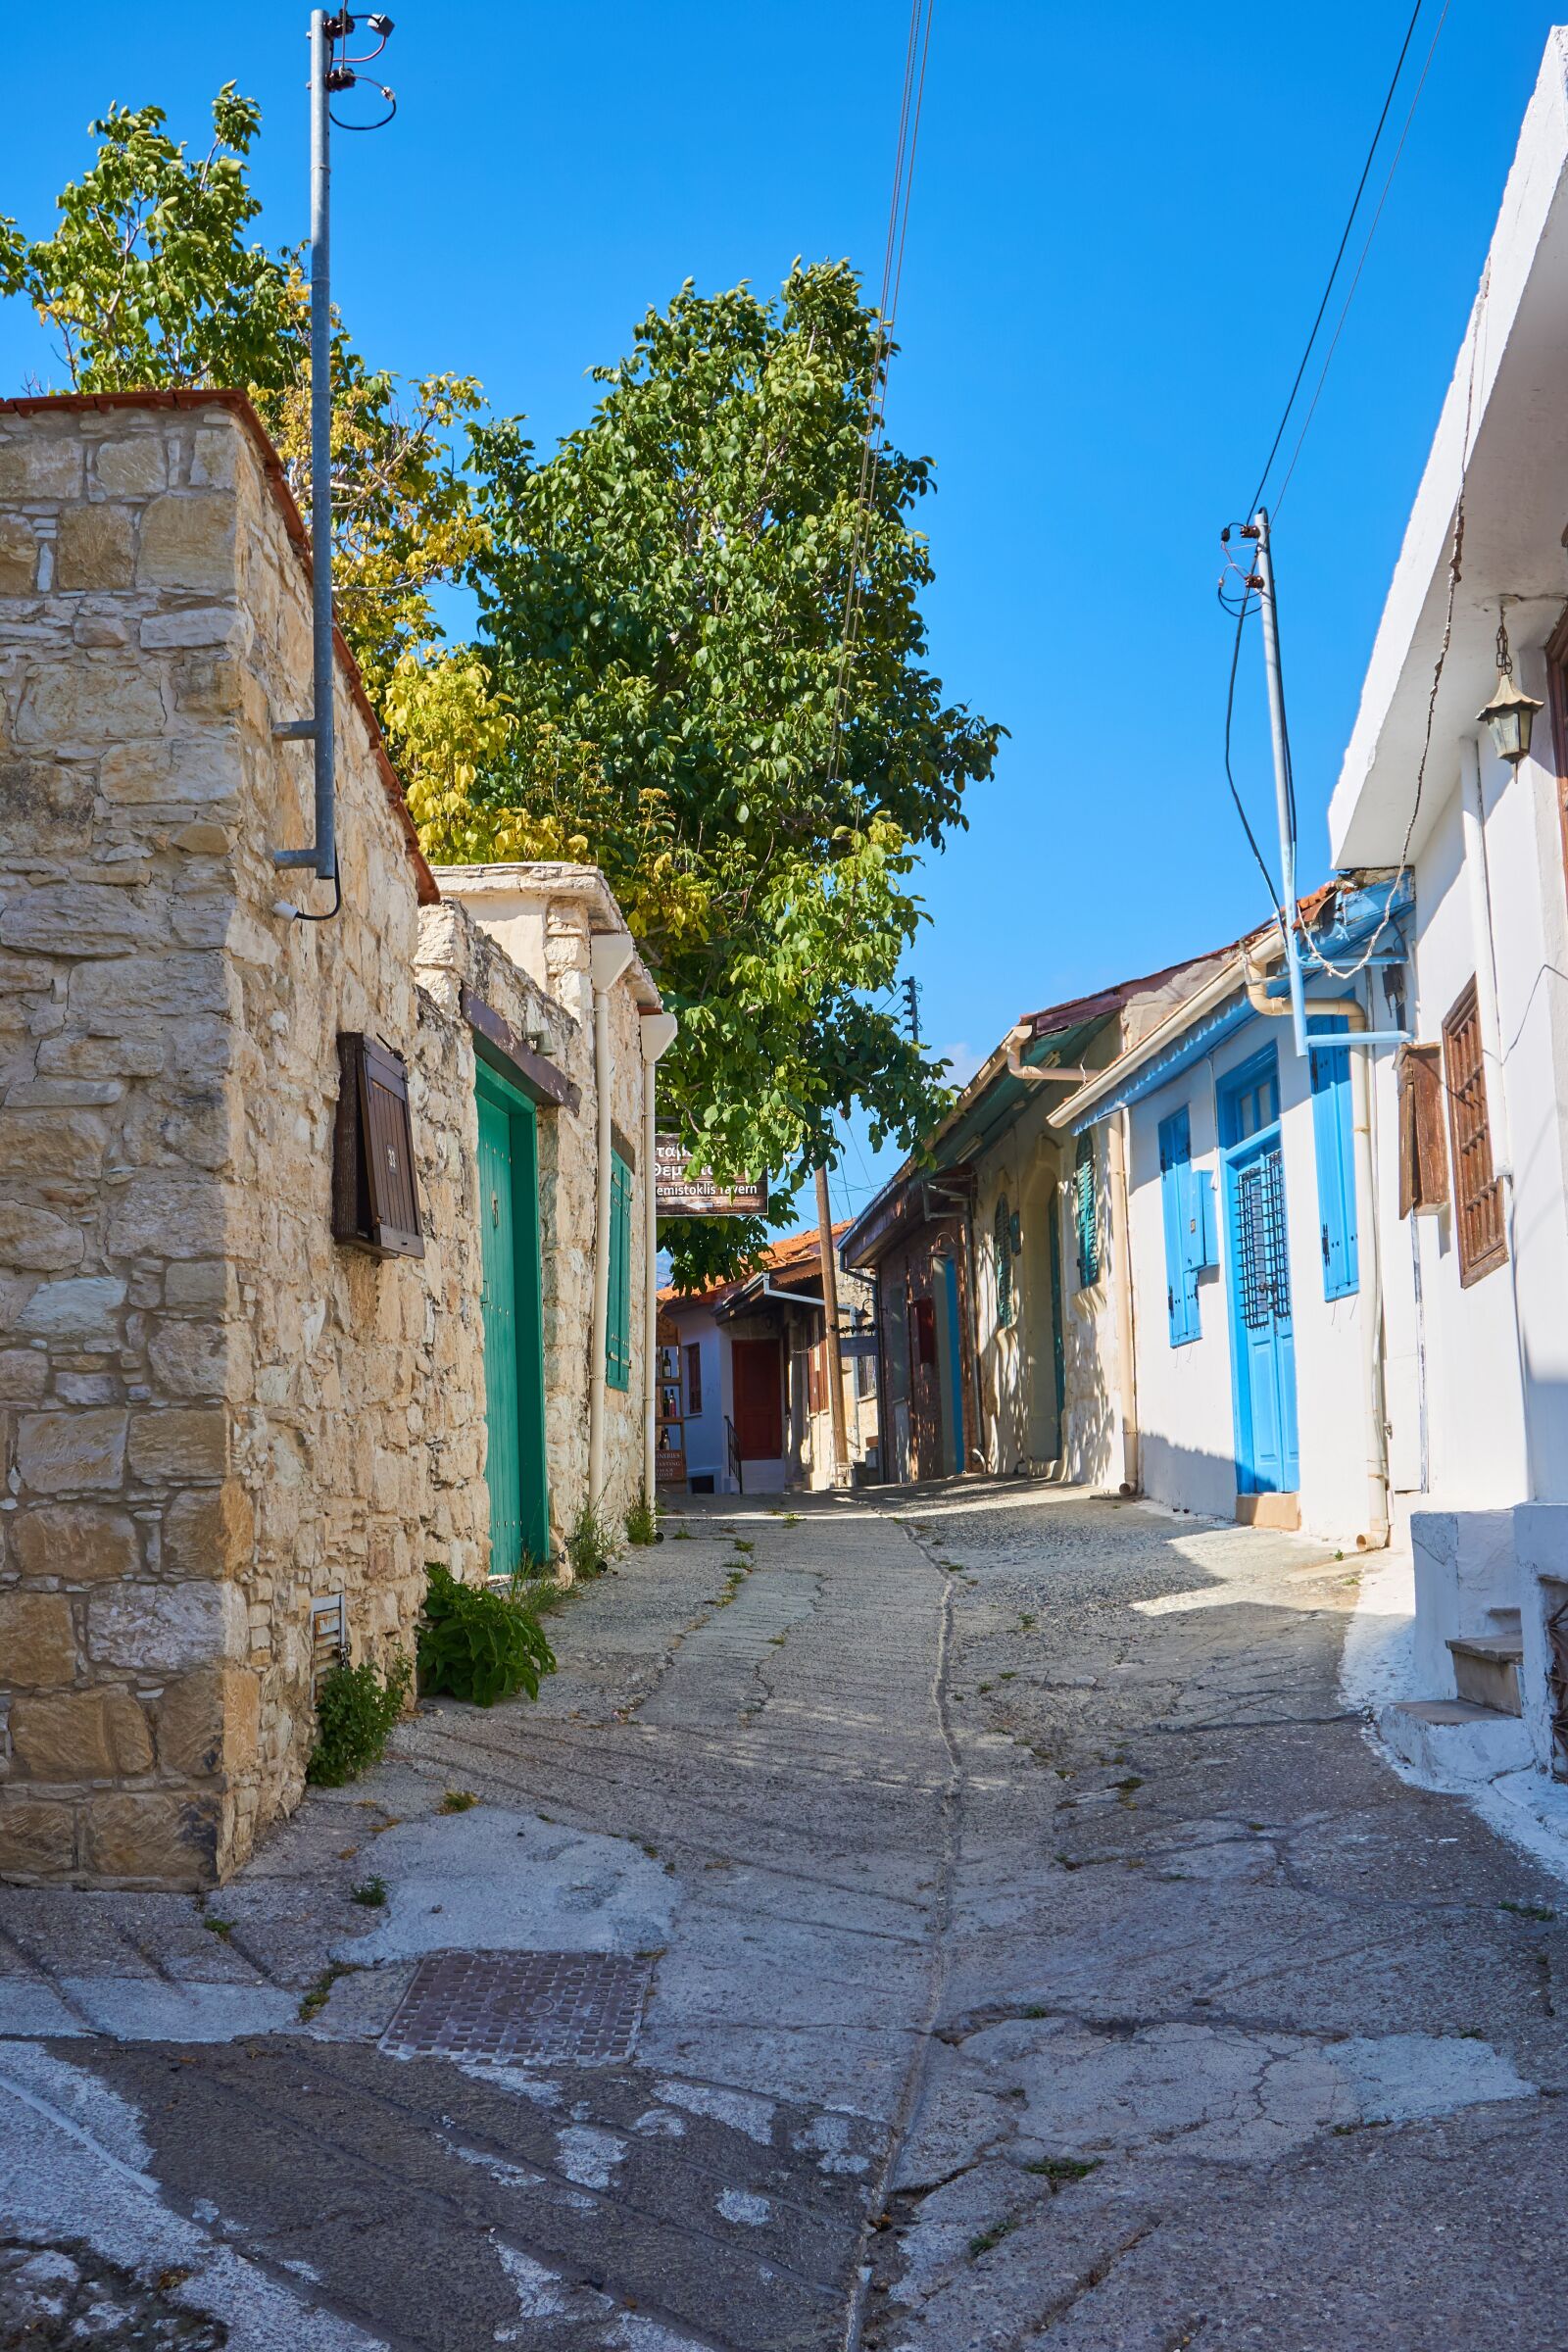 Sony a6000 + Sony E PZ 16-50 mm F3.5-5.6 OSS (SELP1650) sample photo. Cyprus, village, alley photography